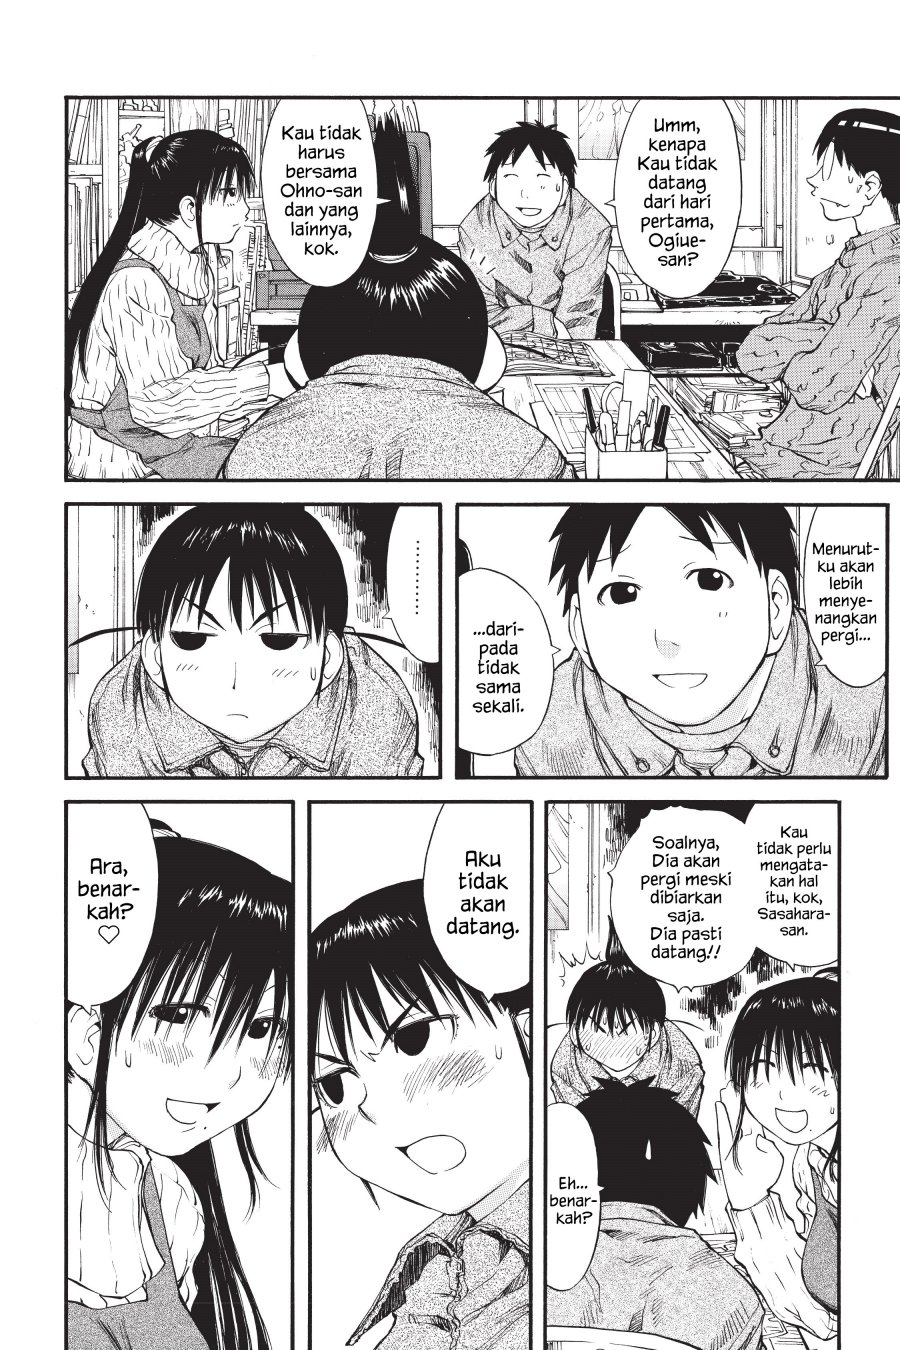 Genshiken – The Society for the Study of Modern Visual Culture Chapter 33 Image 5